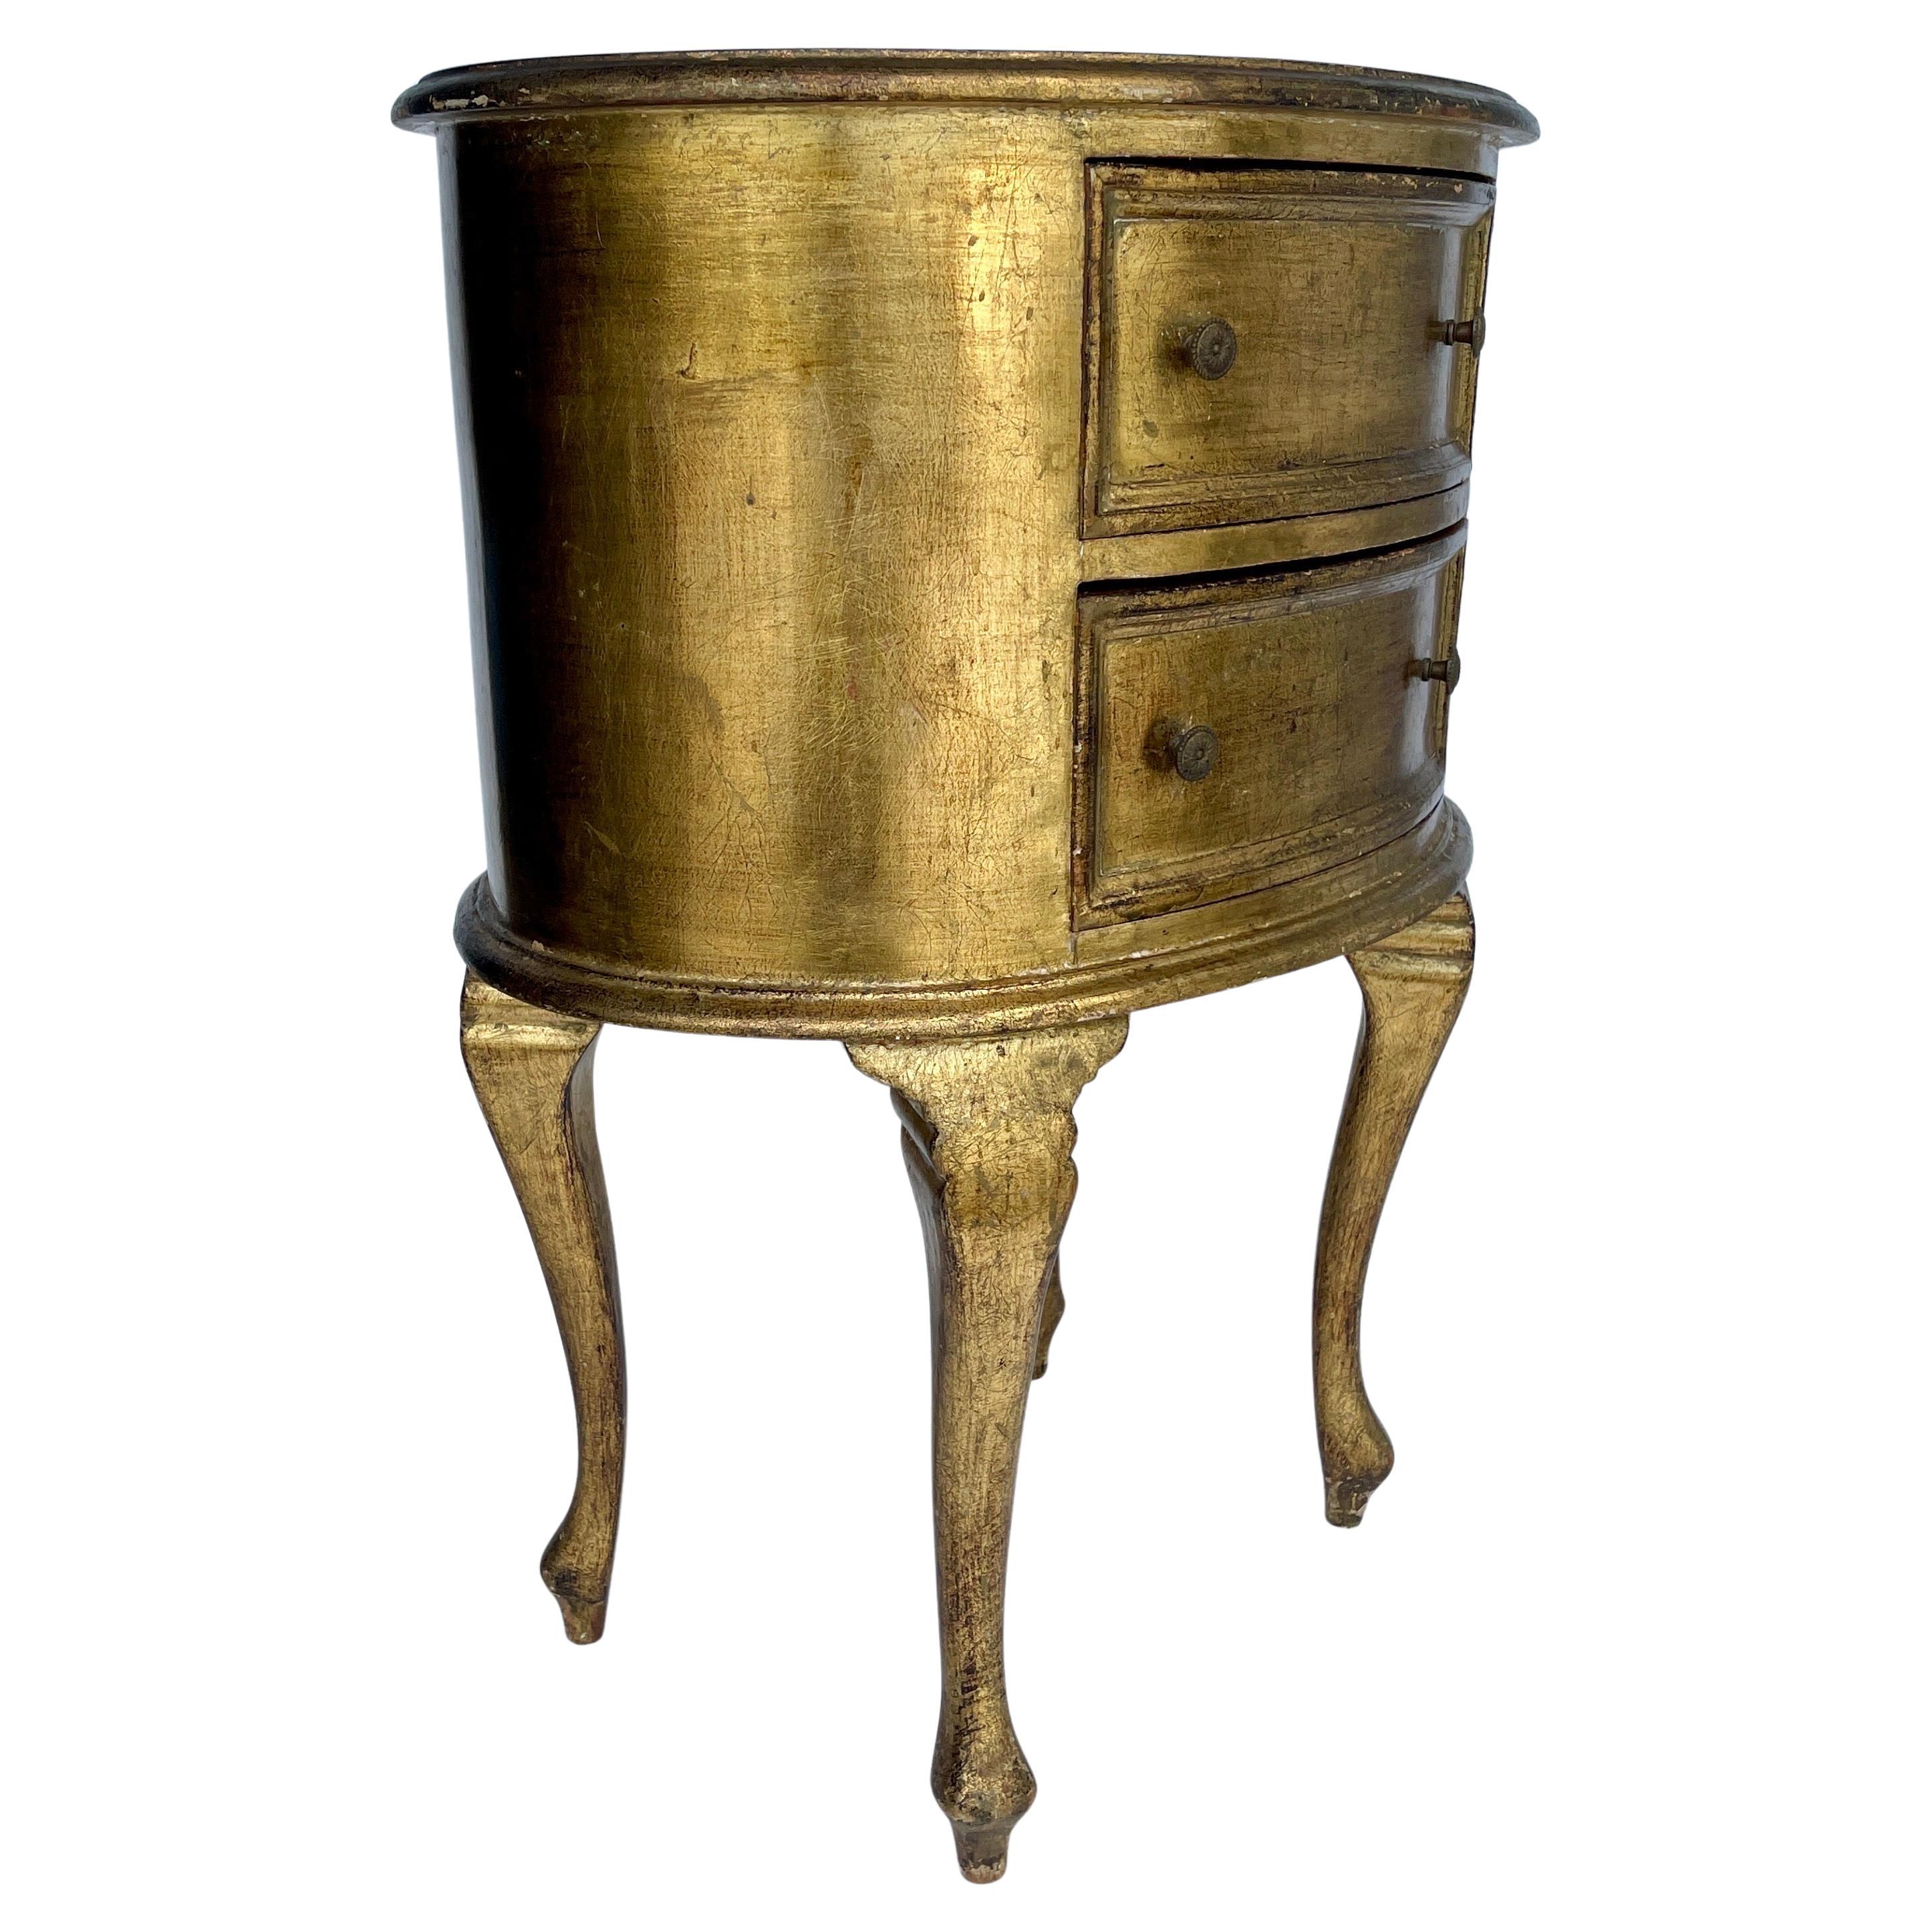 Oval 1950's Florentine Gilt Bedside Accent Side Table, Italy

Charming Mid-Century modern two-drawer side table from the 1950's. This piece has original gilt gold finish and certainly elegant standing alone or next to a sofa or used in a bedroom.